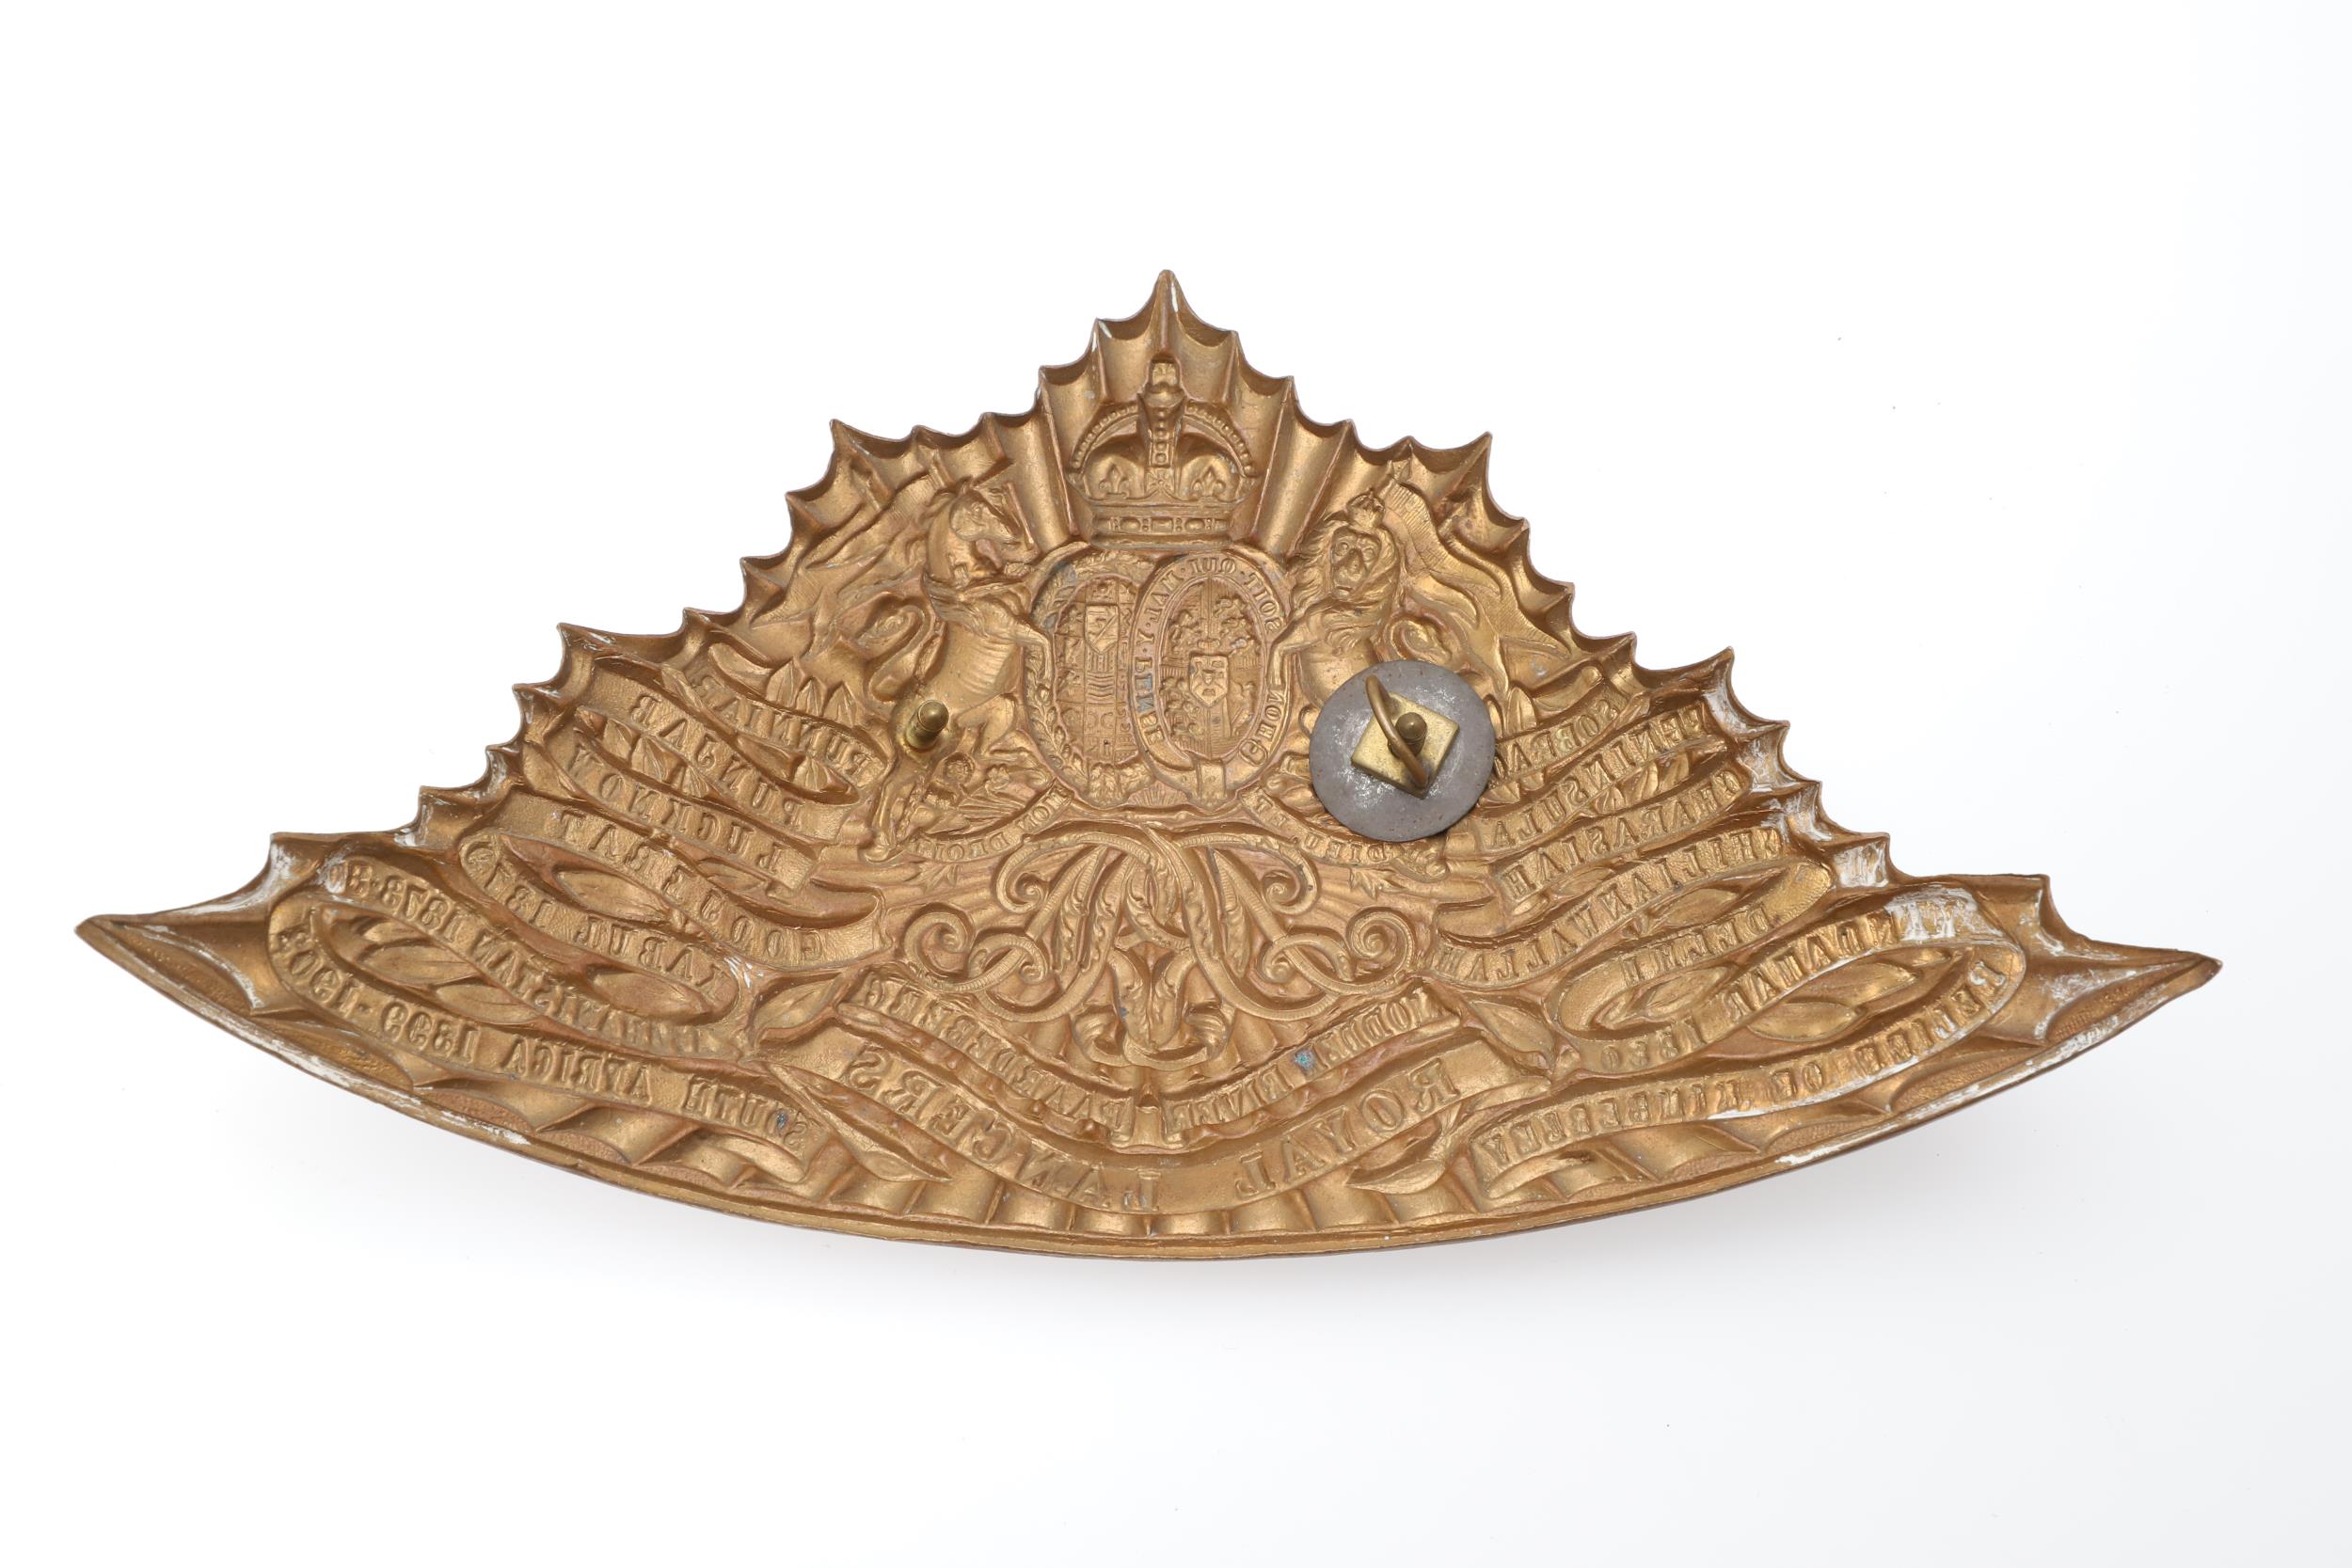 A POST 1902 ROYAL LANCERS HELMET PLATE AND CHIN STRAP. - Image 3 of 9